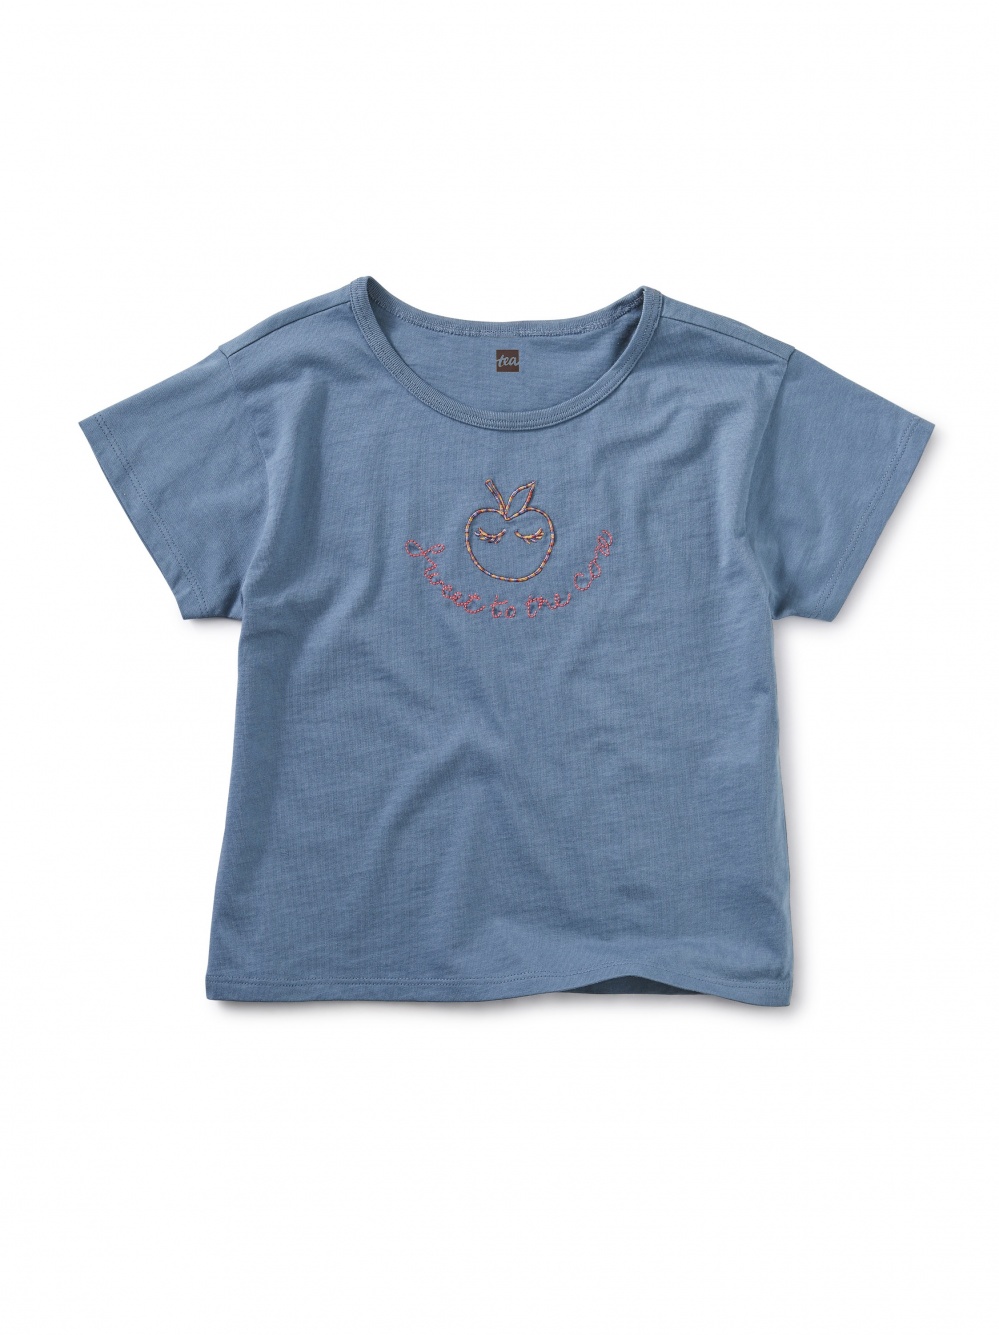 Sweet to the Core Graphic Tee